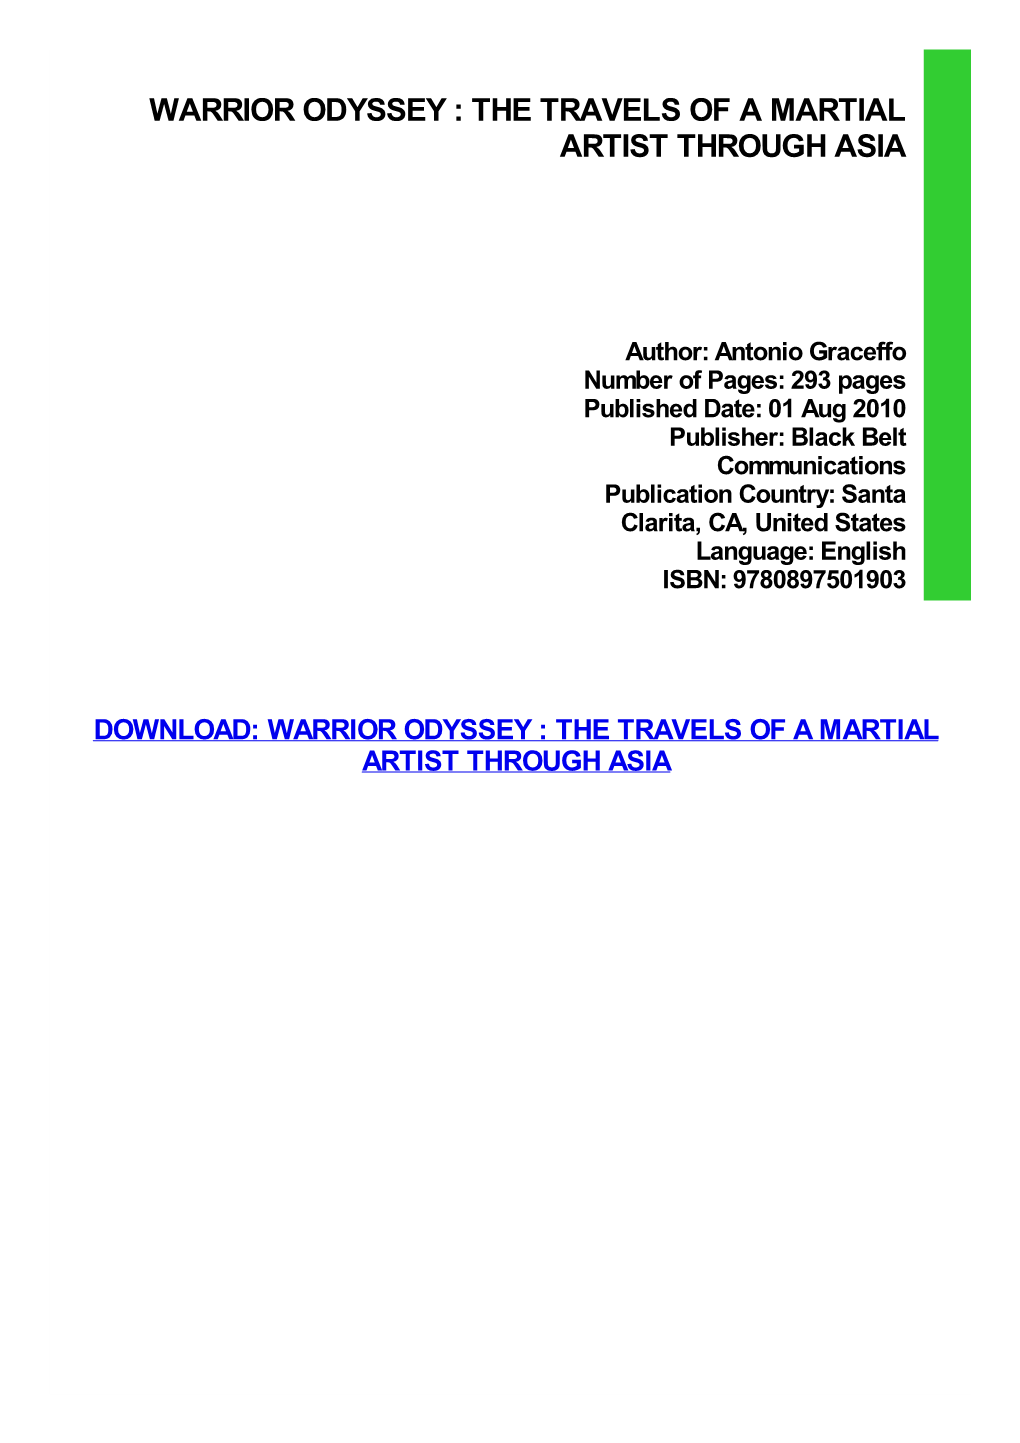 Warrior Odyssey : the Travels of a Martial Artist Through Asia